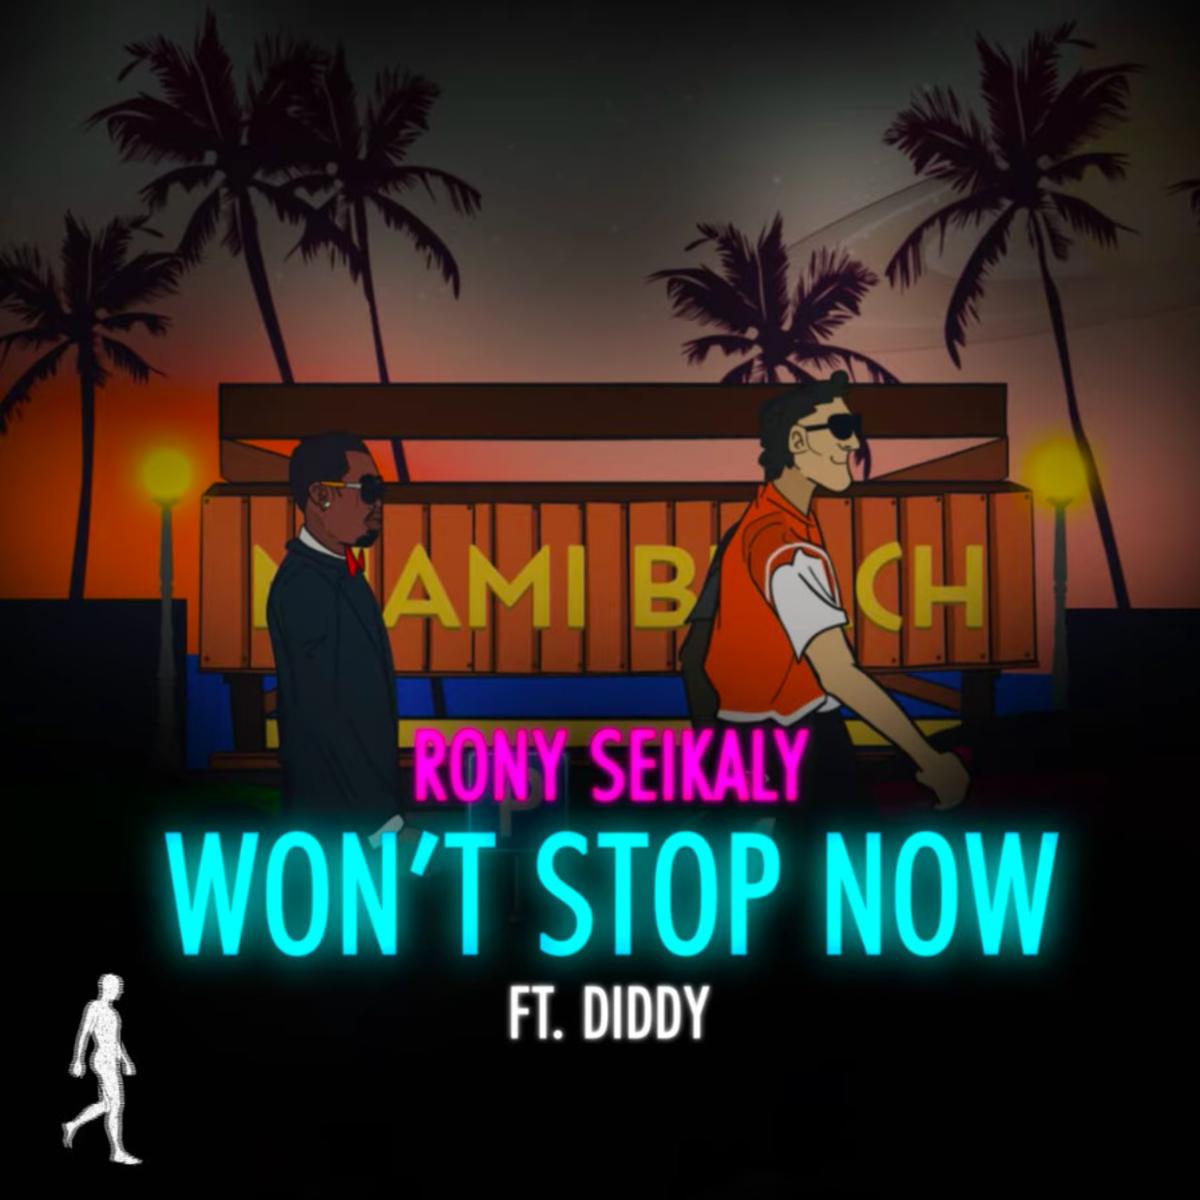 DOWNLOAD MP3: Rony Seikaly - Won't Stop Now Ft. Diddy